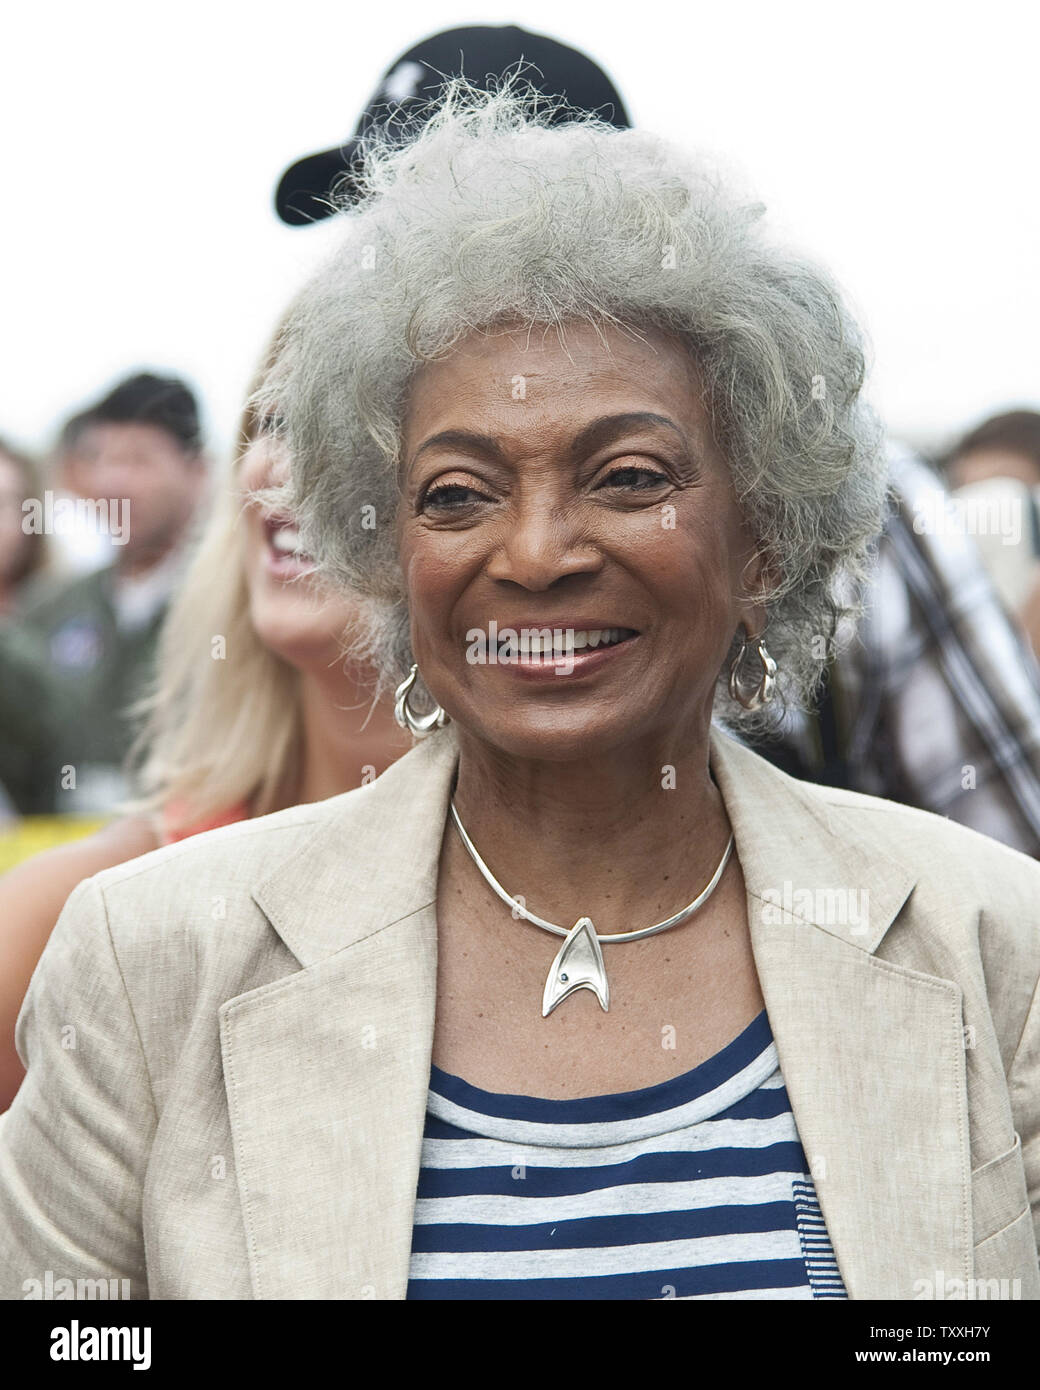 Star Trek actress, Nichelle Nichols who played Lt. Uhura attends the walkout of the crew of STS 135 at the Kennedy Space Center on July 8, 2011.   UPI/Joe Marino - Bill Cantrell Stock Photo